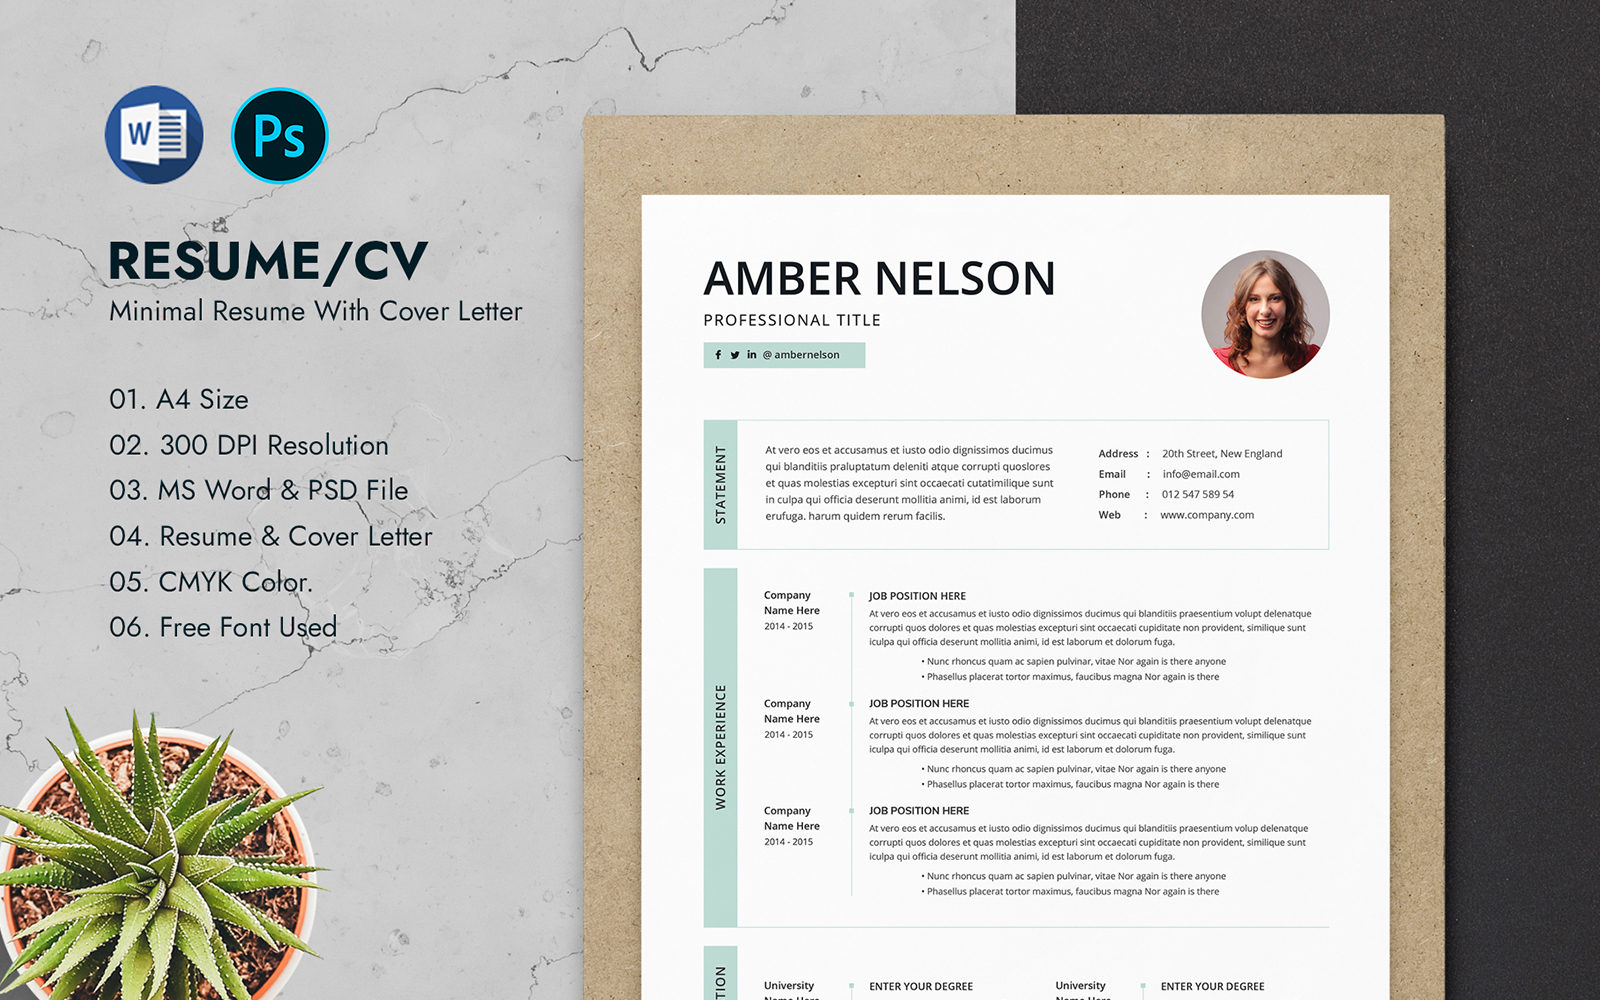 Amber Nelson Clean Resume Template Design